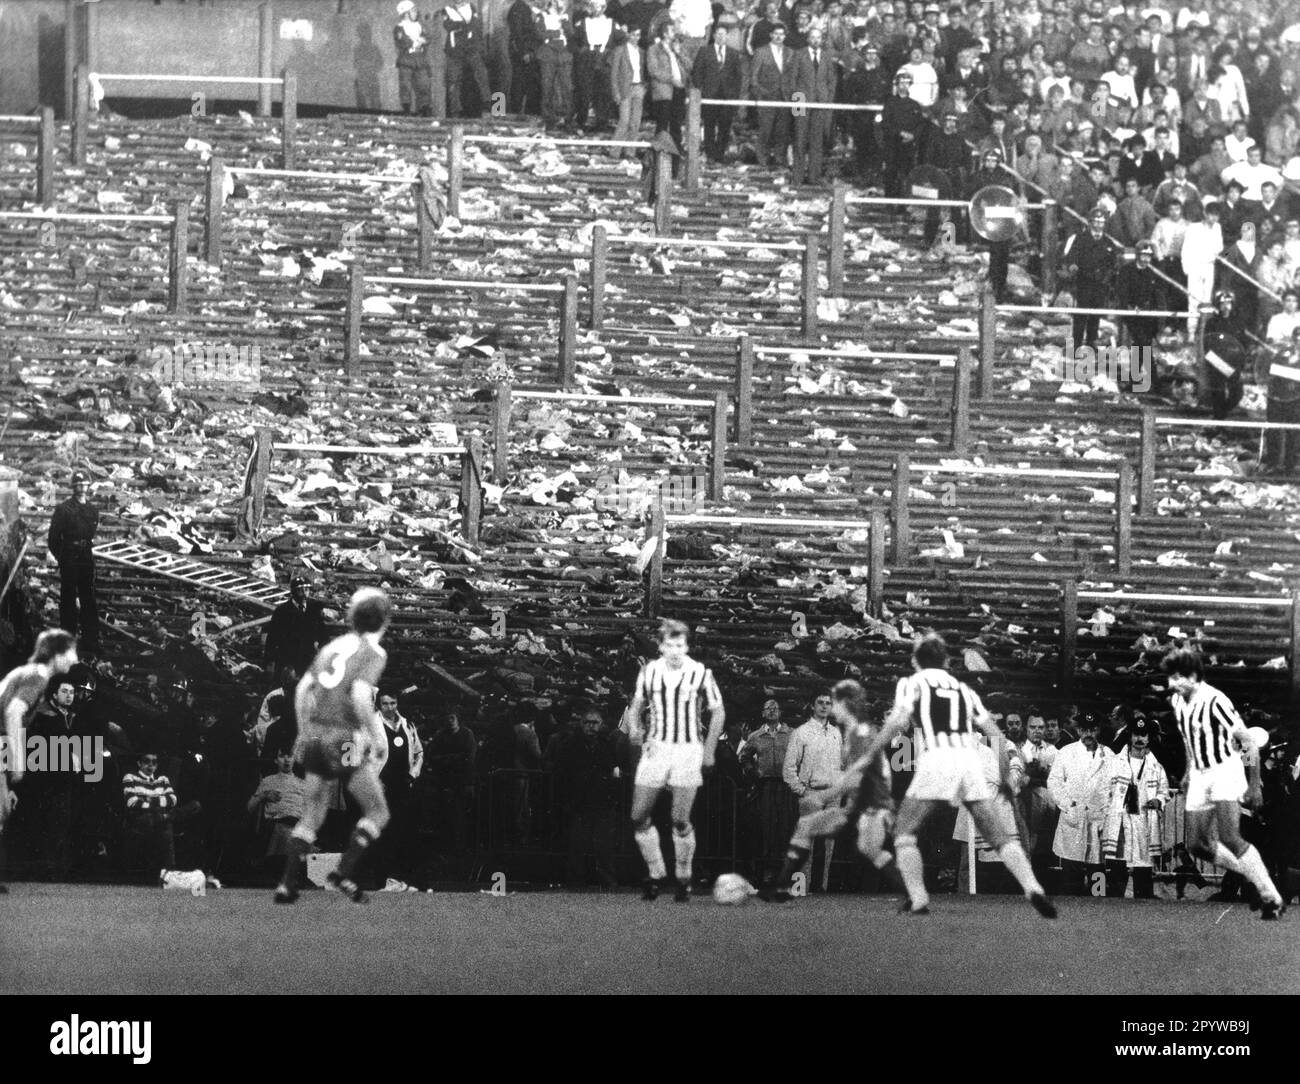 Disaster with 39 dead on the occasion of the European Cup final Juventus Turin - FC Liverpool in the Heysel Stadium in Brussels on 29.05.1985. Devastated fan block during the game. For journalistic use only! Only for editorial use! [automated translation] Stock Photo